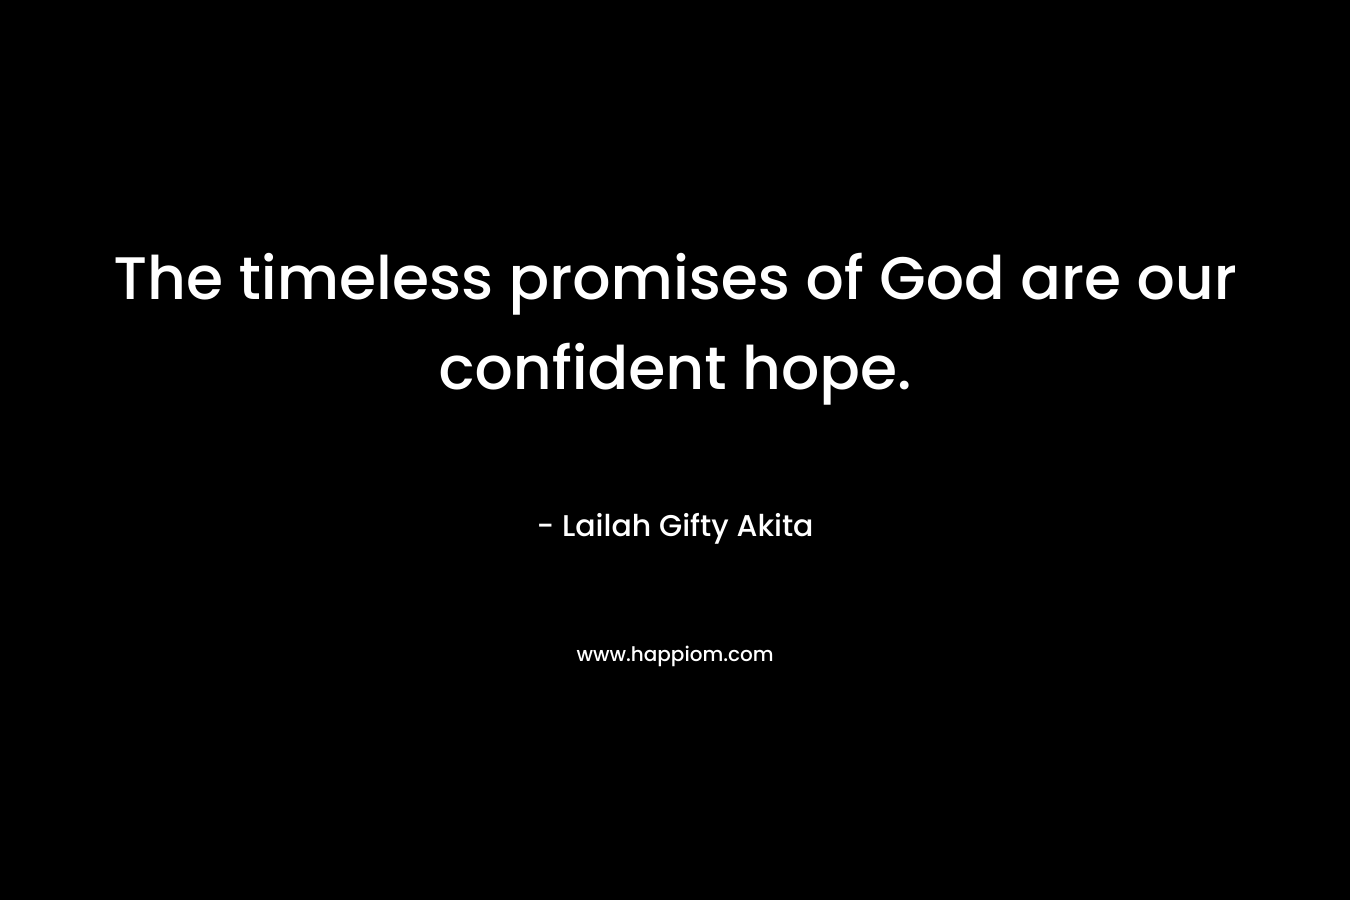 The timeless promises of God are our confident hope.